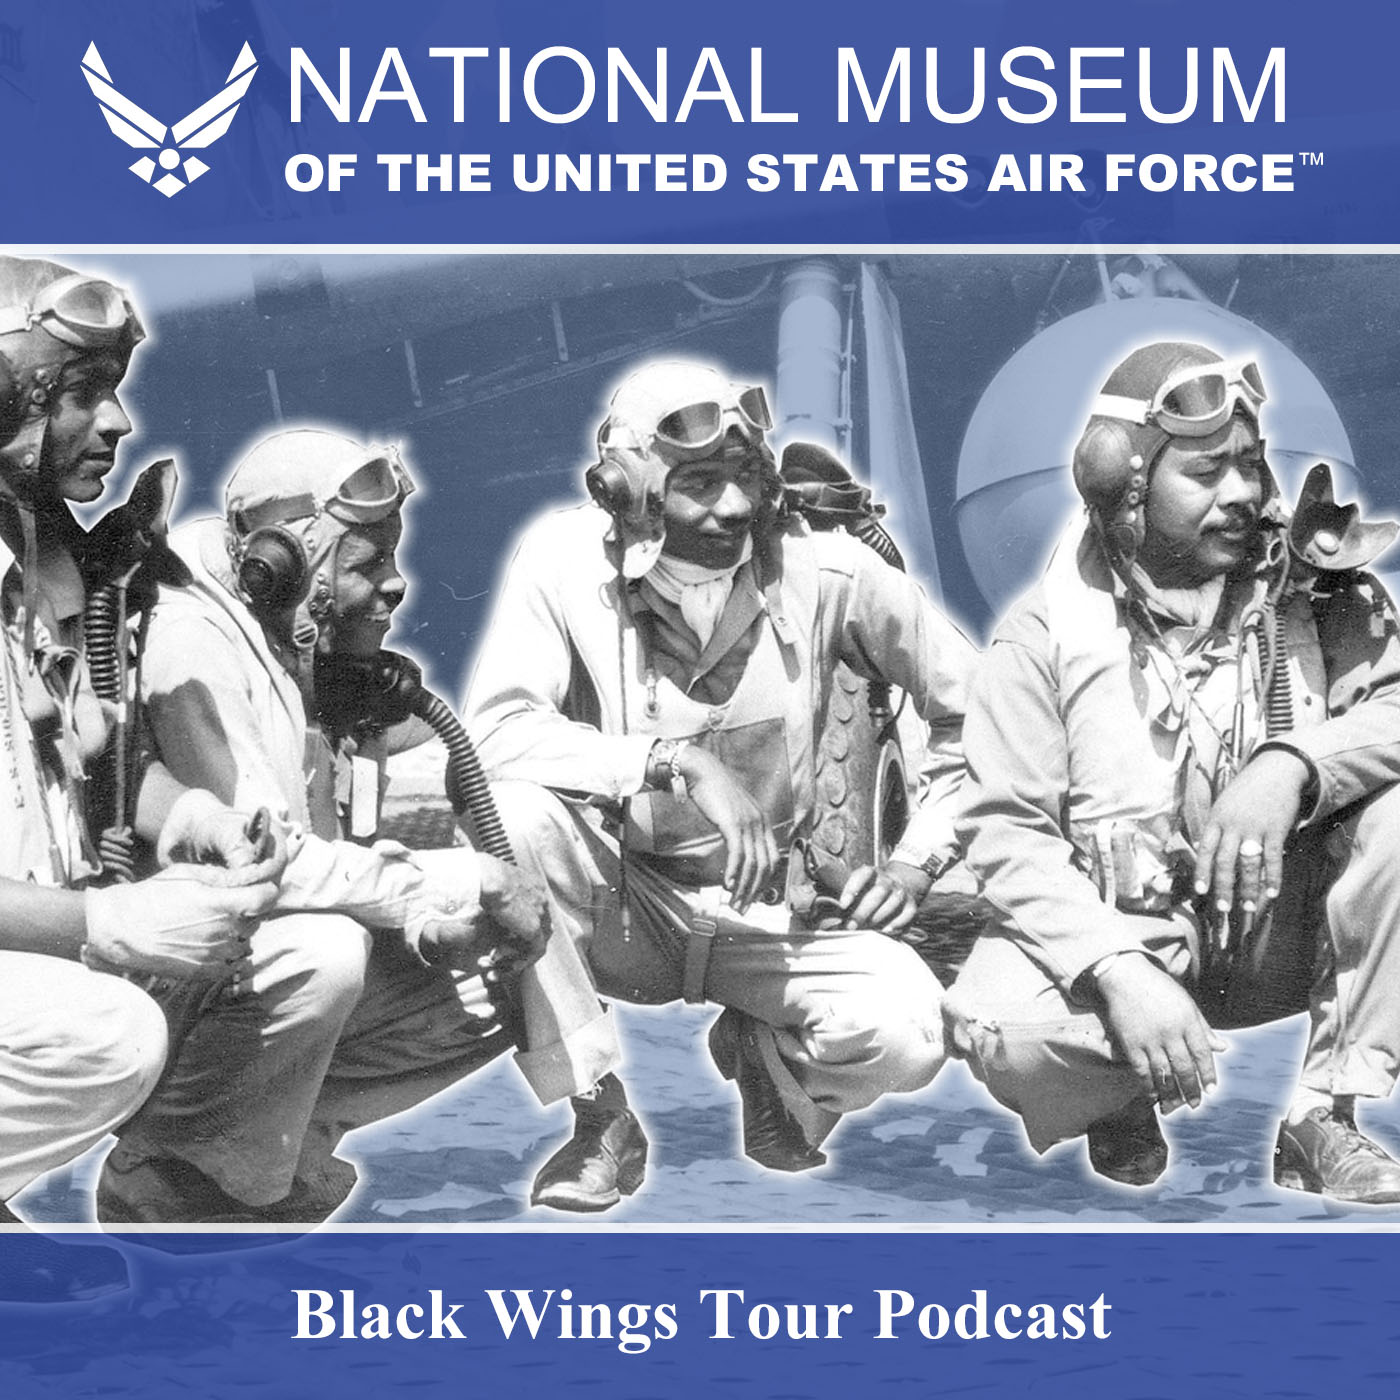 Black Wings Tour Podcast